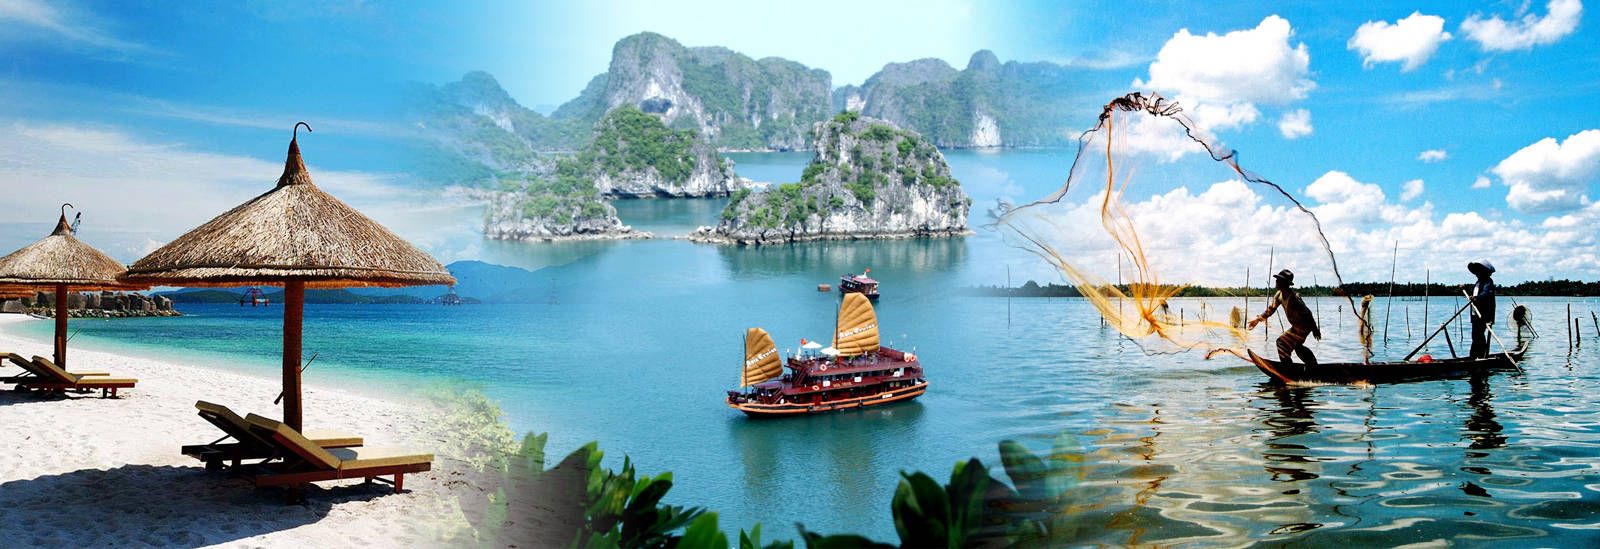 Where you should travel in Vietnam based on your zodiac sign?